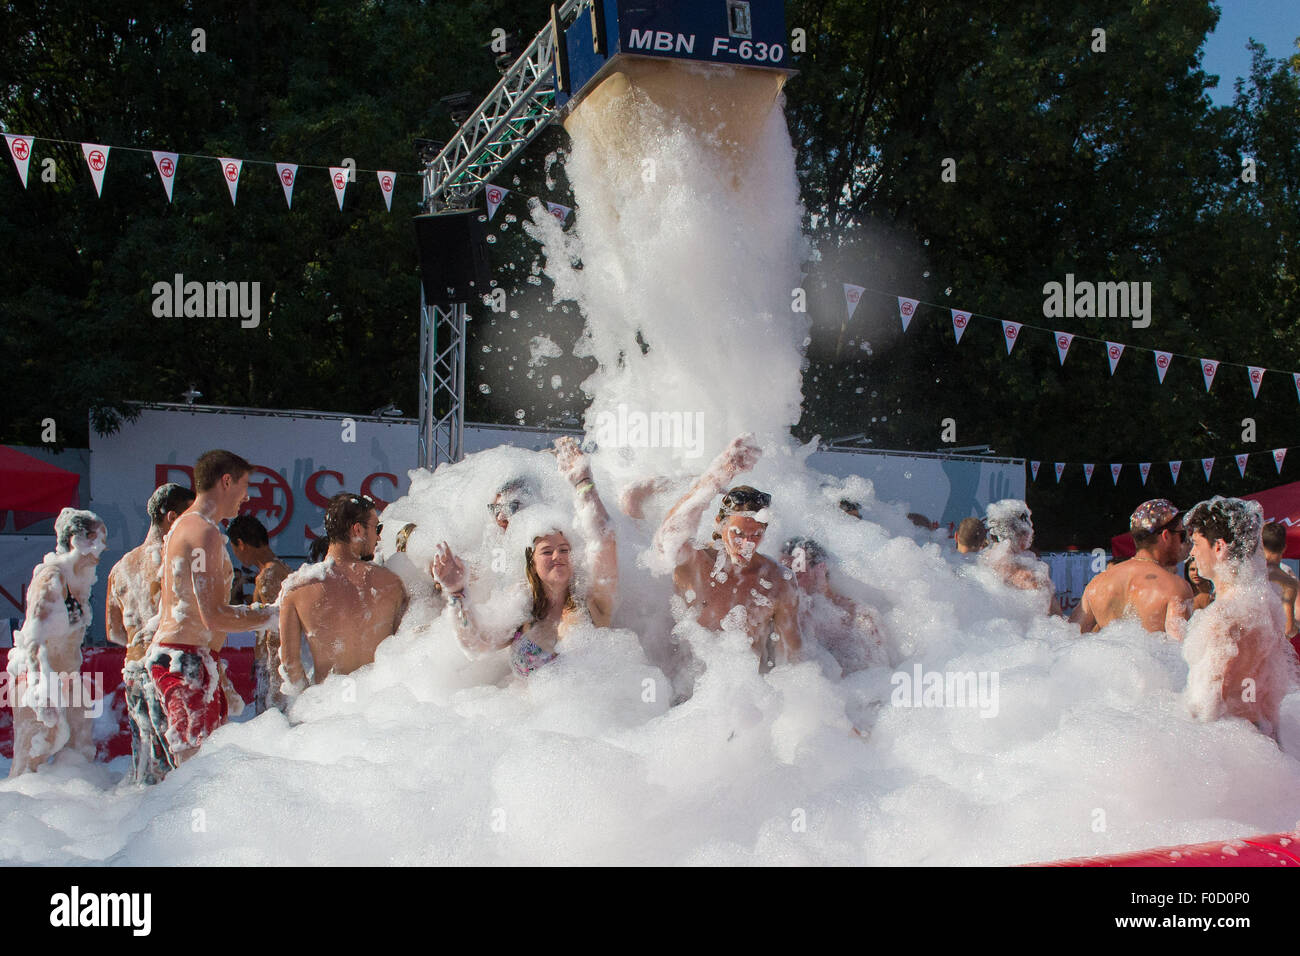 Budapest, Hungary. 12th Aug, 2015. Festival-goers enjoy a foam bath in the summer heat during the Sziget (Hungarian for 'Island') Festival on the Obuda Island in Budapest, Hungary, on August 12, 2015. The 23rd Sziget Festival held from Aug. 10 to 17 was one of the largest music festivals in Europe. Credit:  Attila Volgyi/Xinhua/Alamy Live News Stock Photo